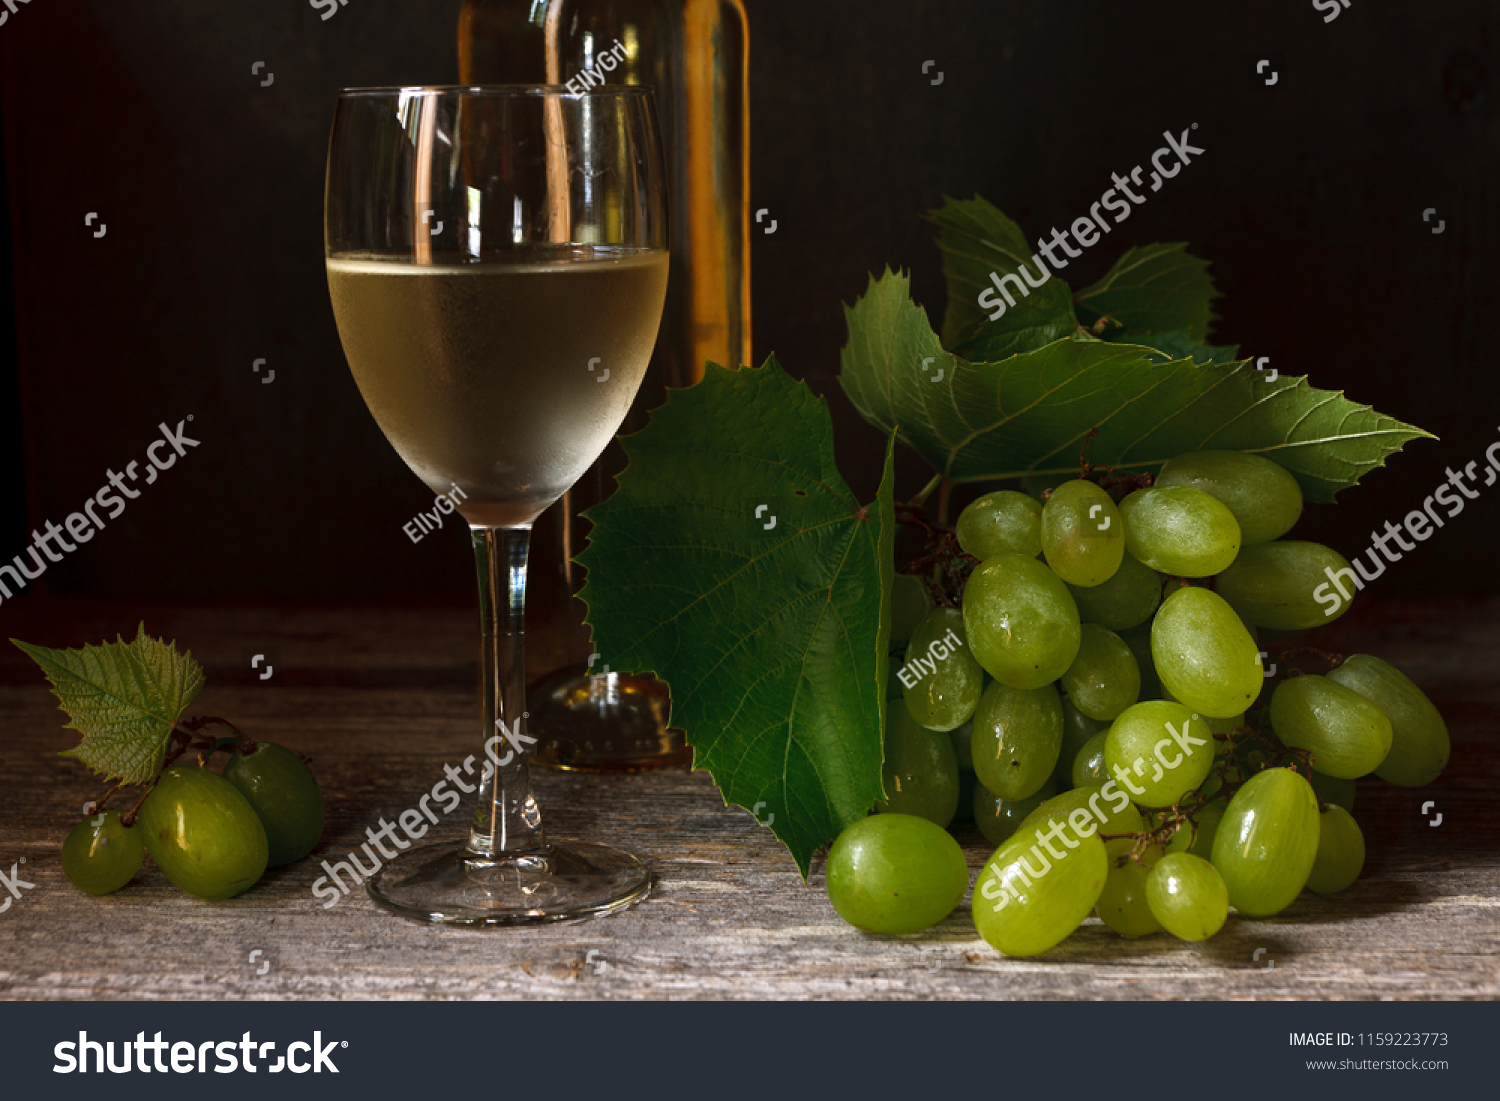 Green grapes with leaves, glass, bottle of white wine on vintage wooden background. Close-up, selective focus. Still life in vintage stile. Dark photo. #1159223773